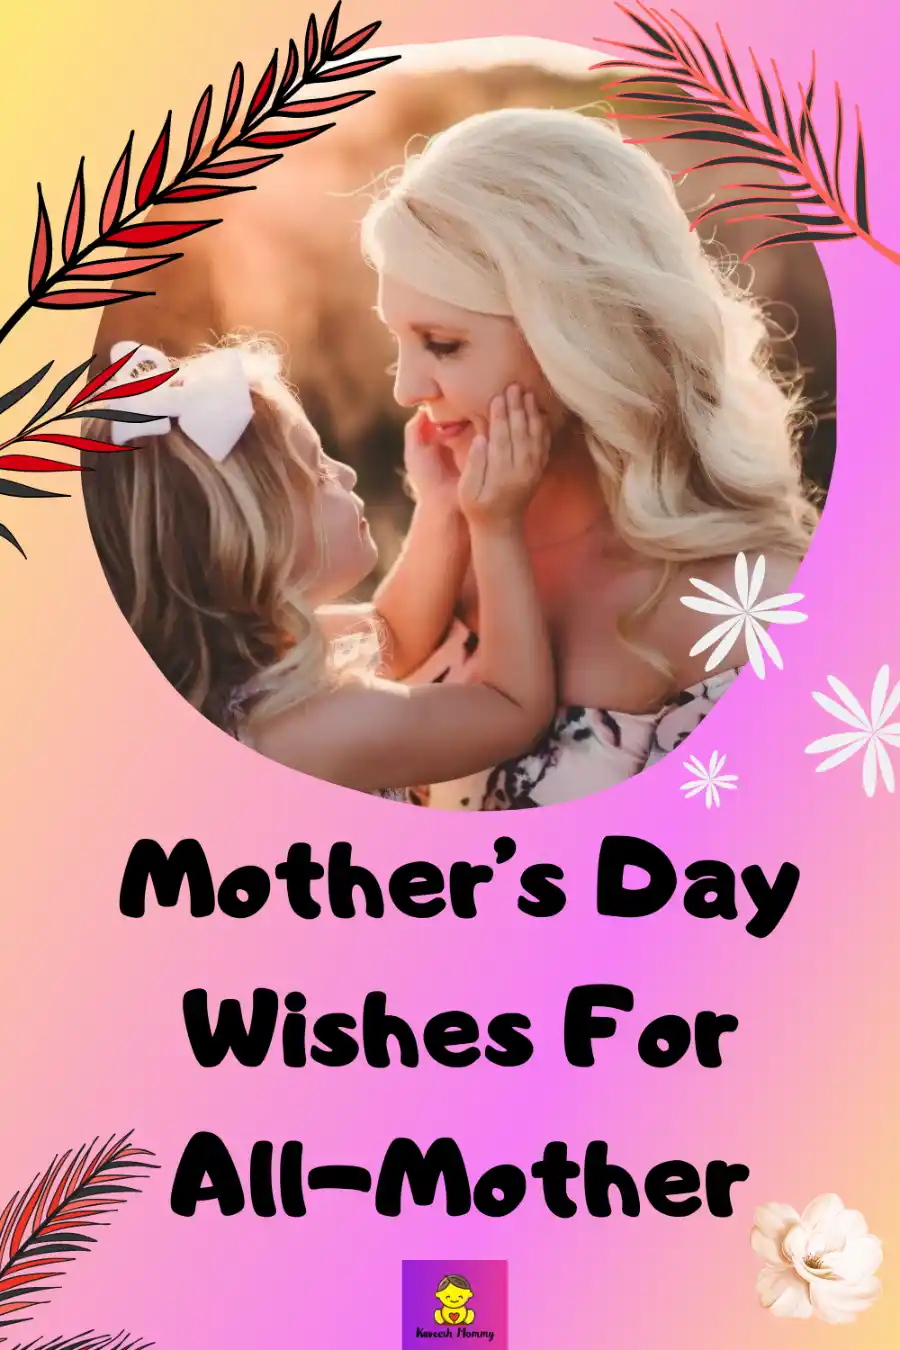 list of Mother’s Day Wishes For All-Mother